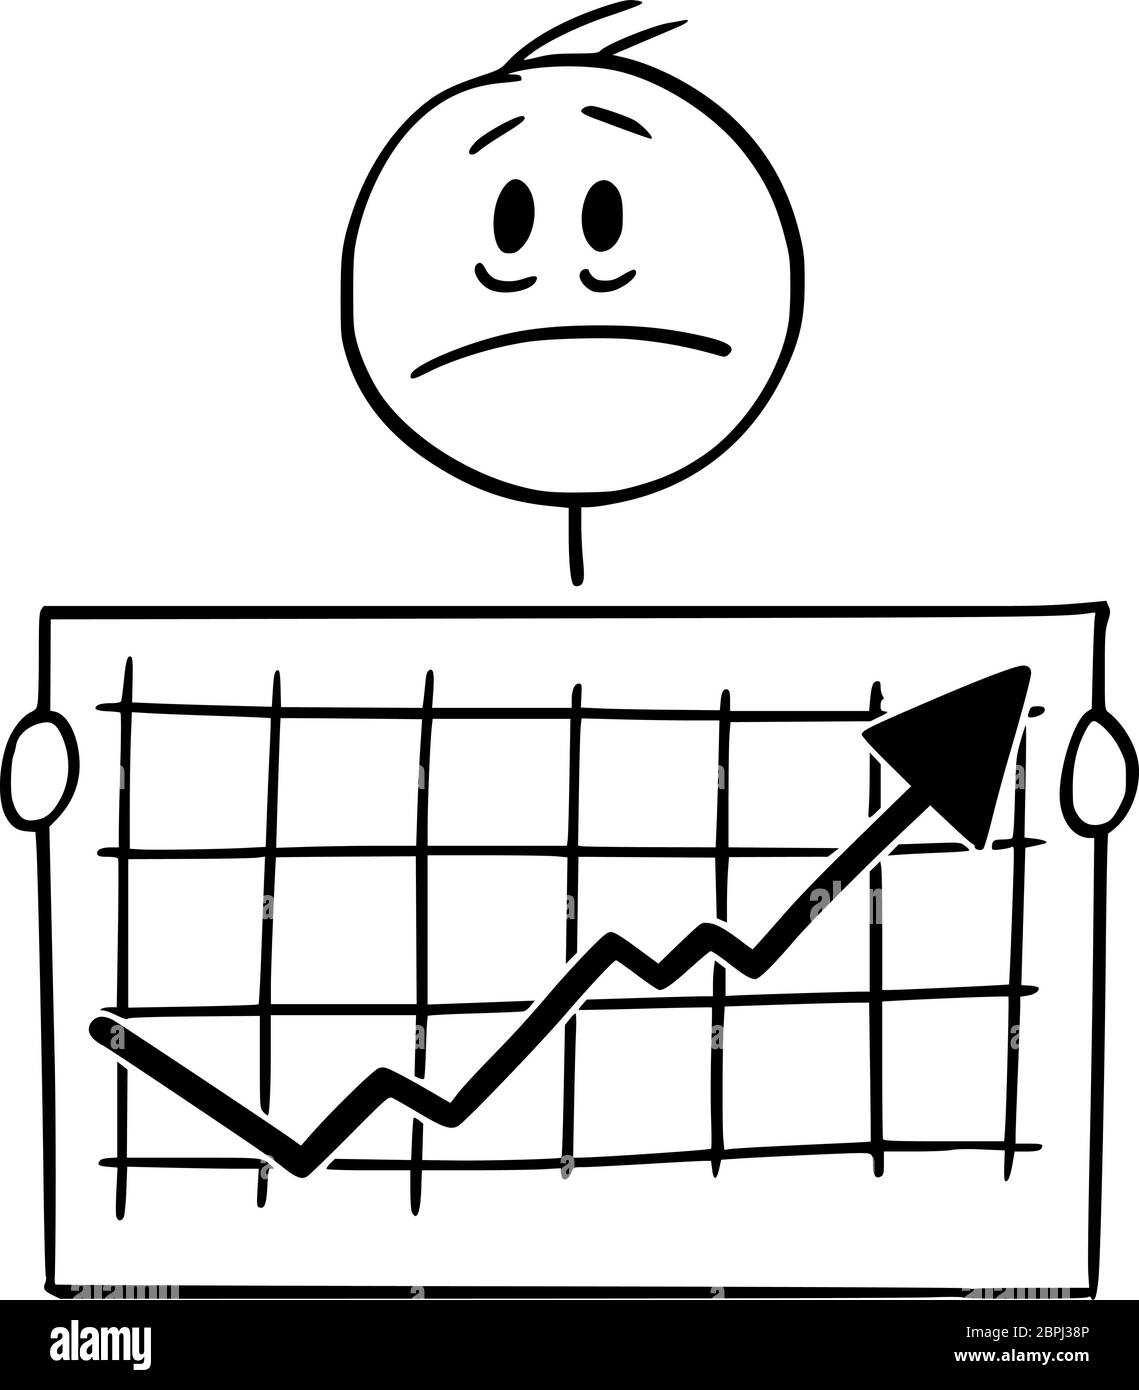 Vector cartoon stick figure drawing conceptual illustration of unhappy frustrated man or businessman holding growing or rising financial chart or graph. Stock Vector